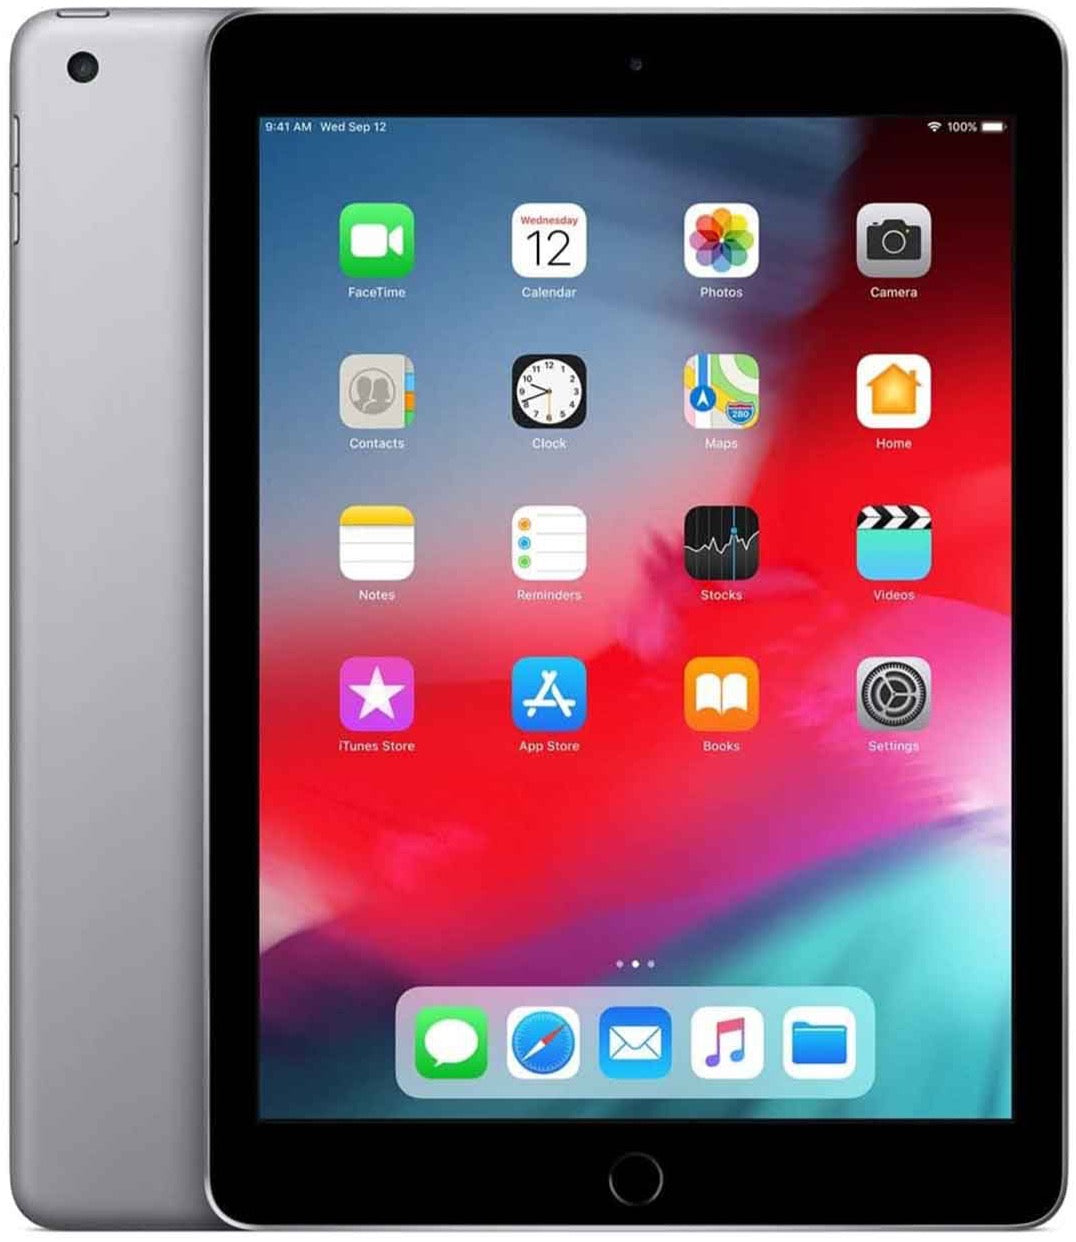 Apple iPad 5 32GB Wifi Space Gray (Excellent) With New Case, Screen Protector & Shipping